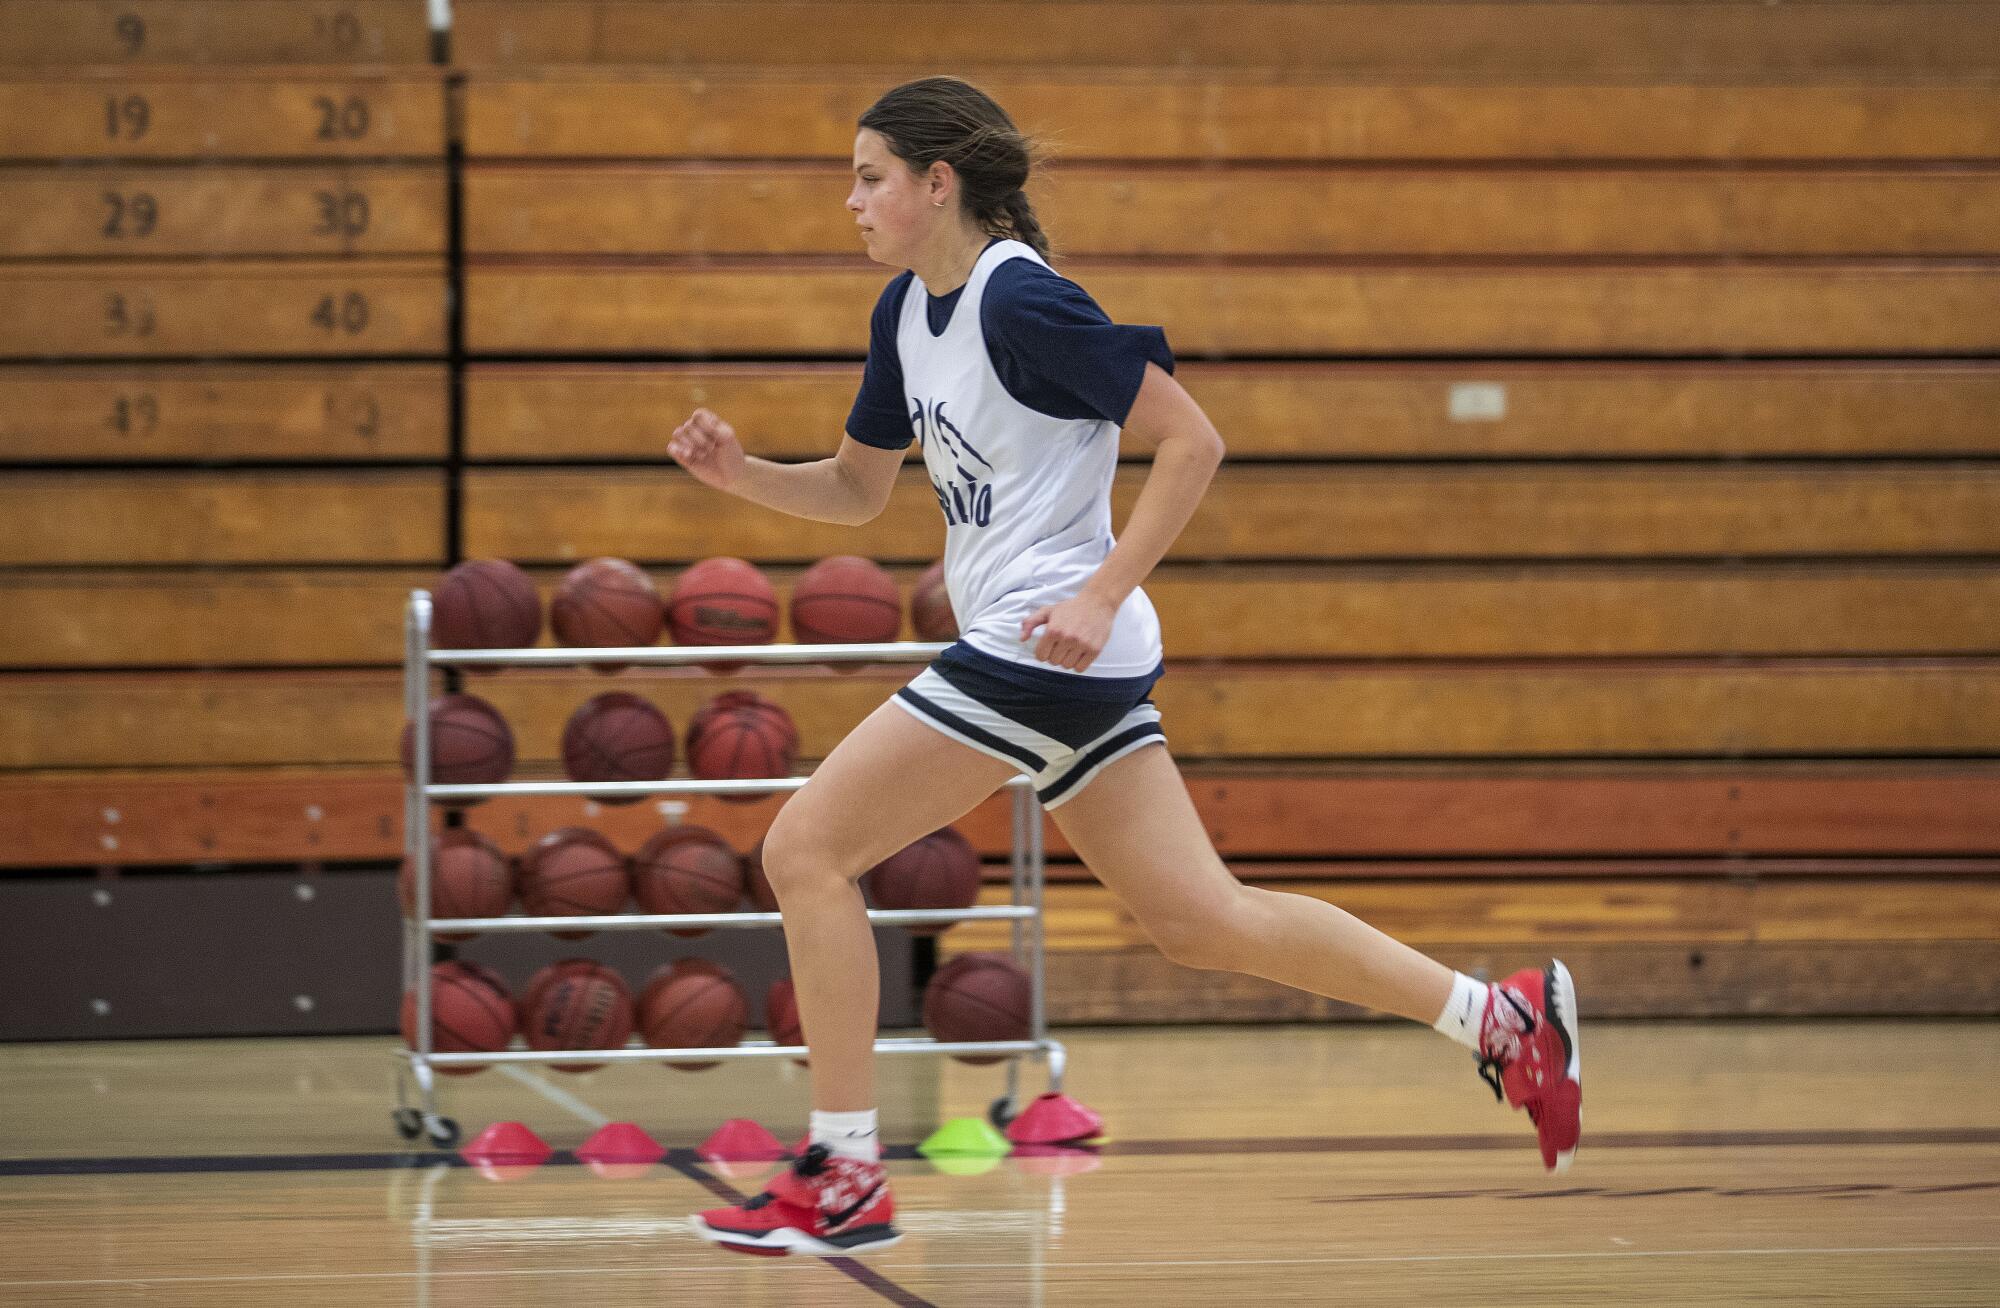 Gabriela Jaquez sprints down the court during a conditioning drill.